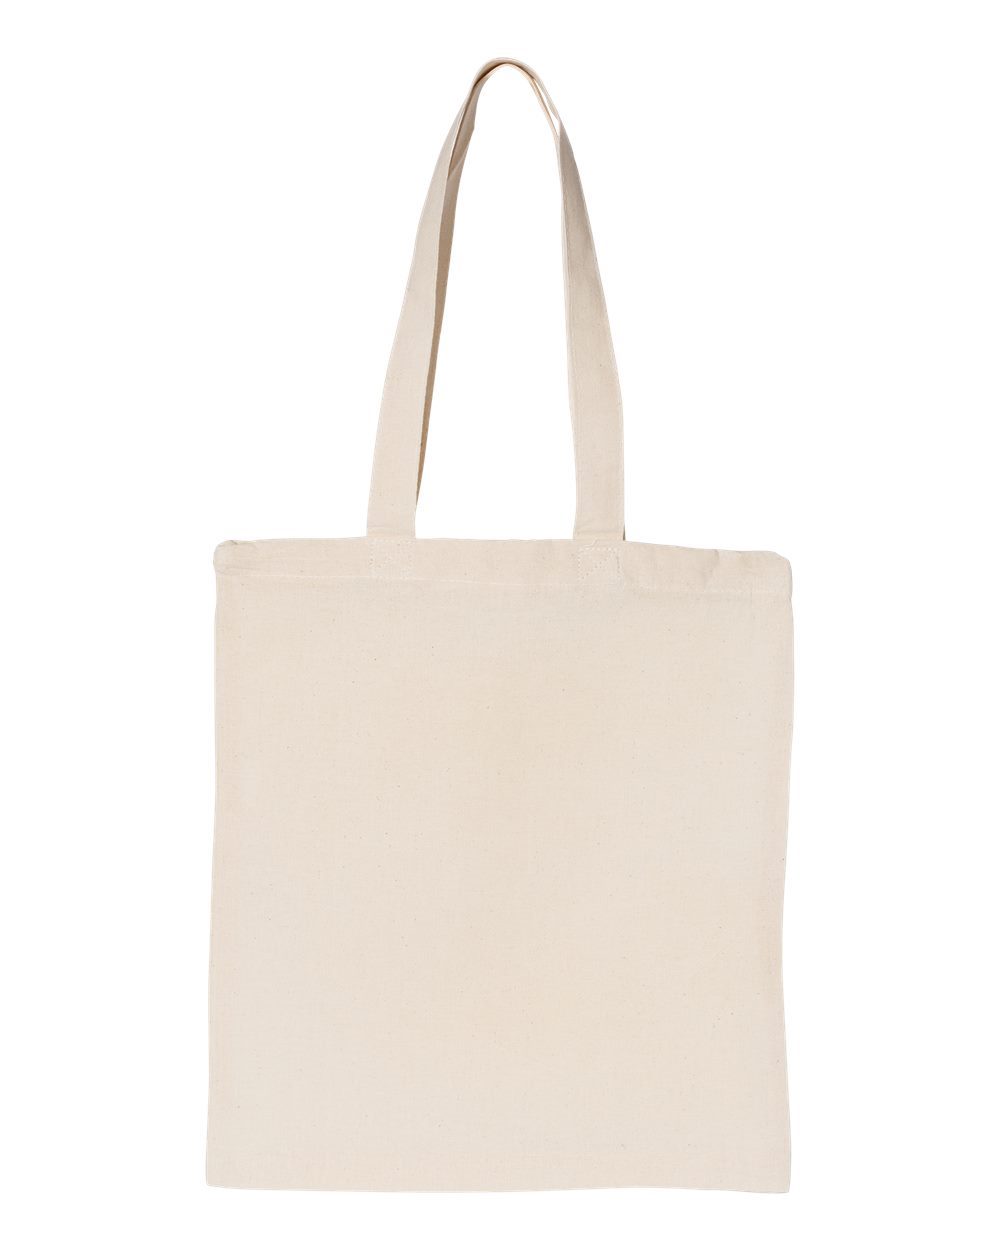 mens bags Large Canvas Tote